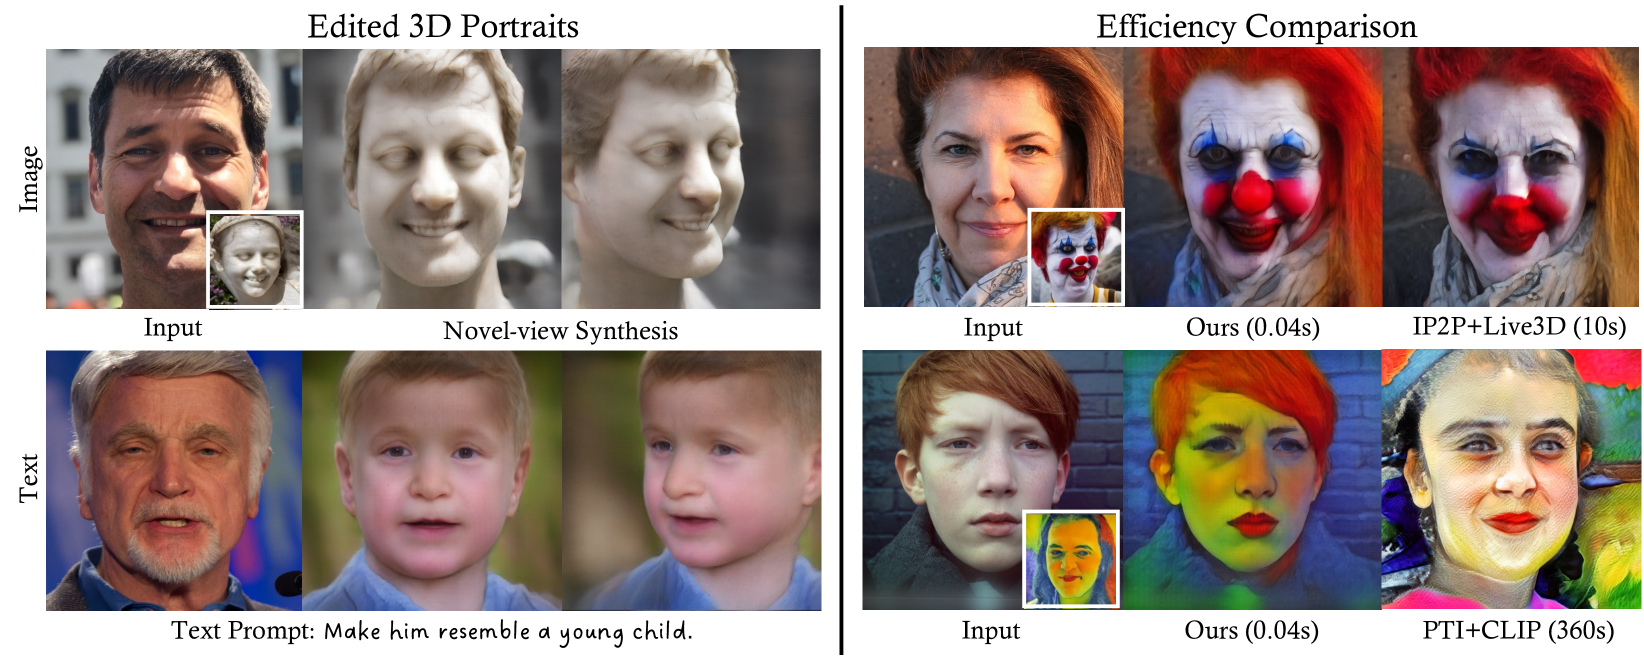 Real-time 3D-aware Portrait Editing from a Single Image